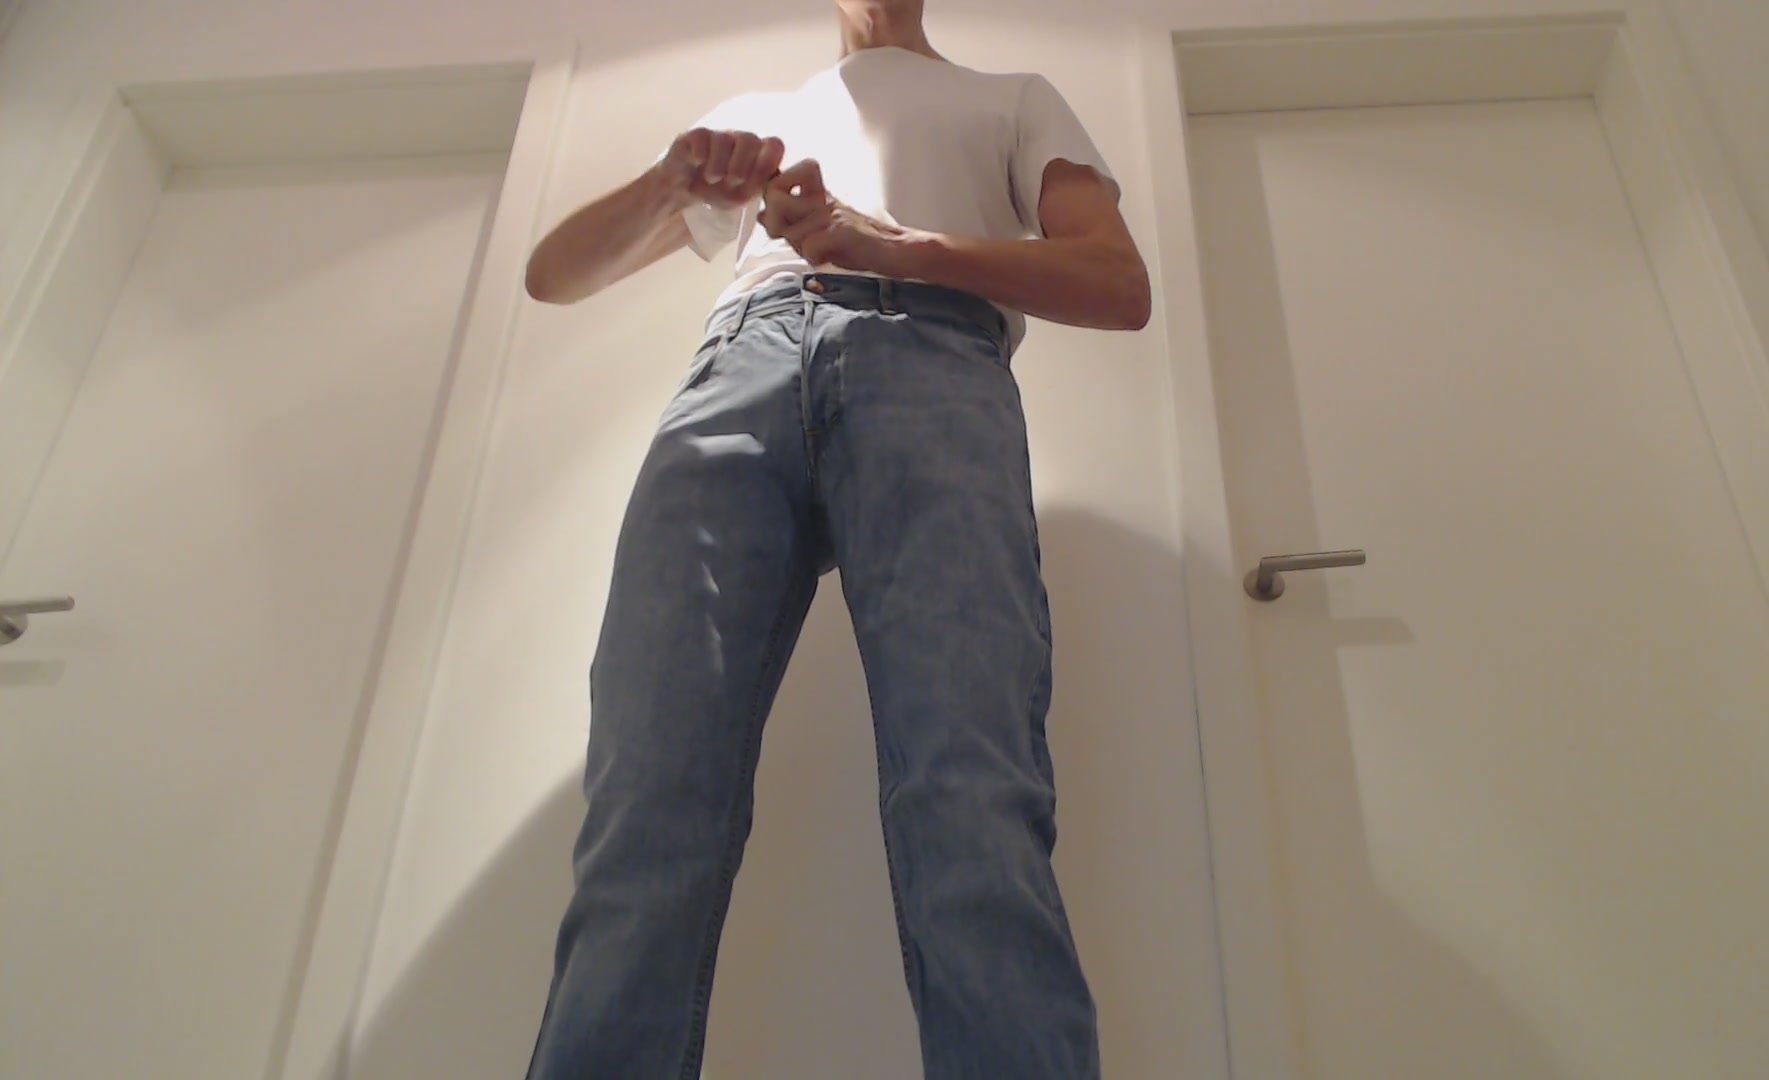 piss in jeans - video 10